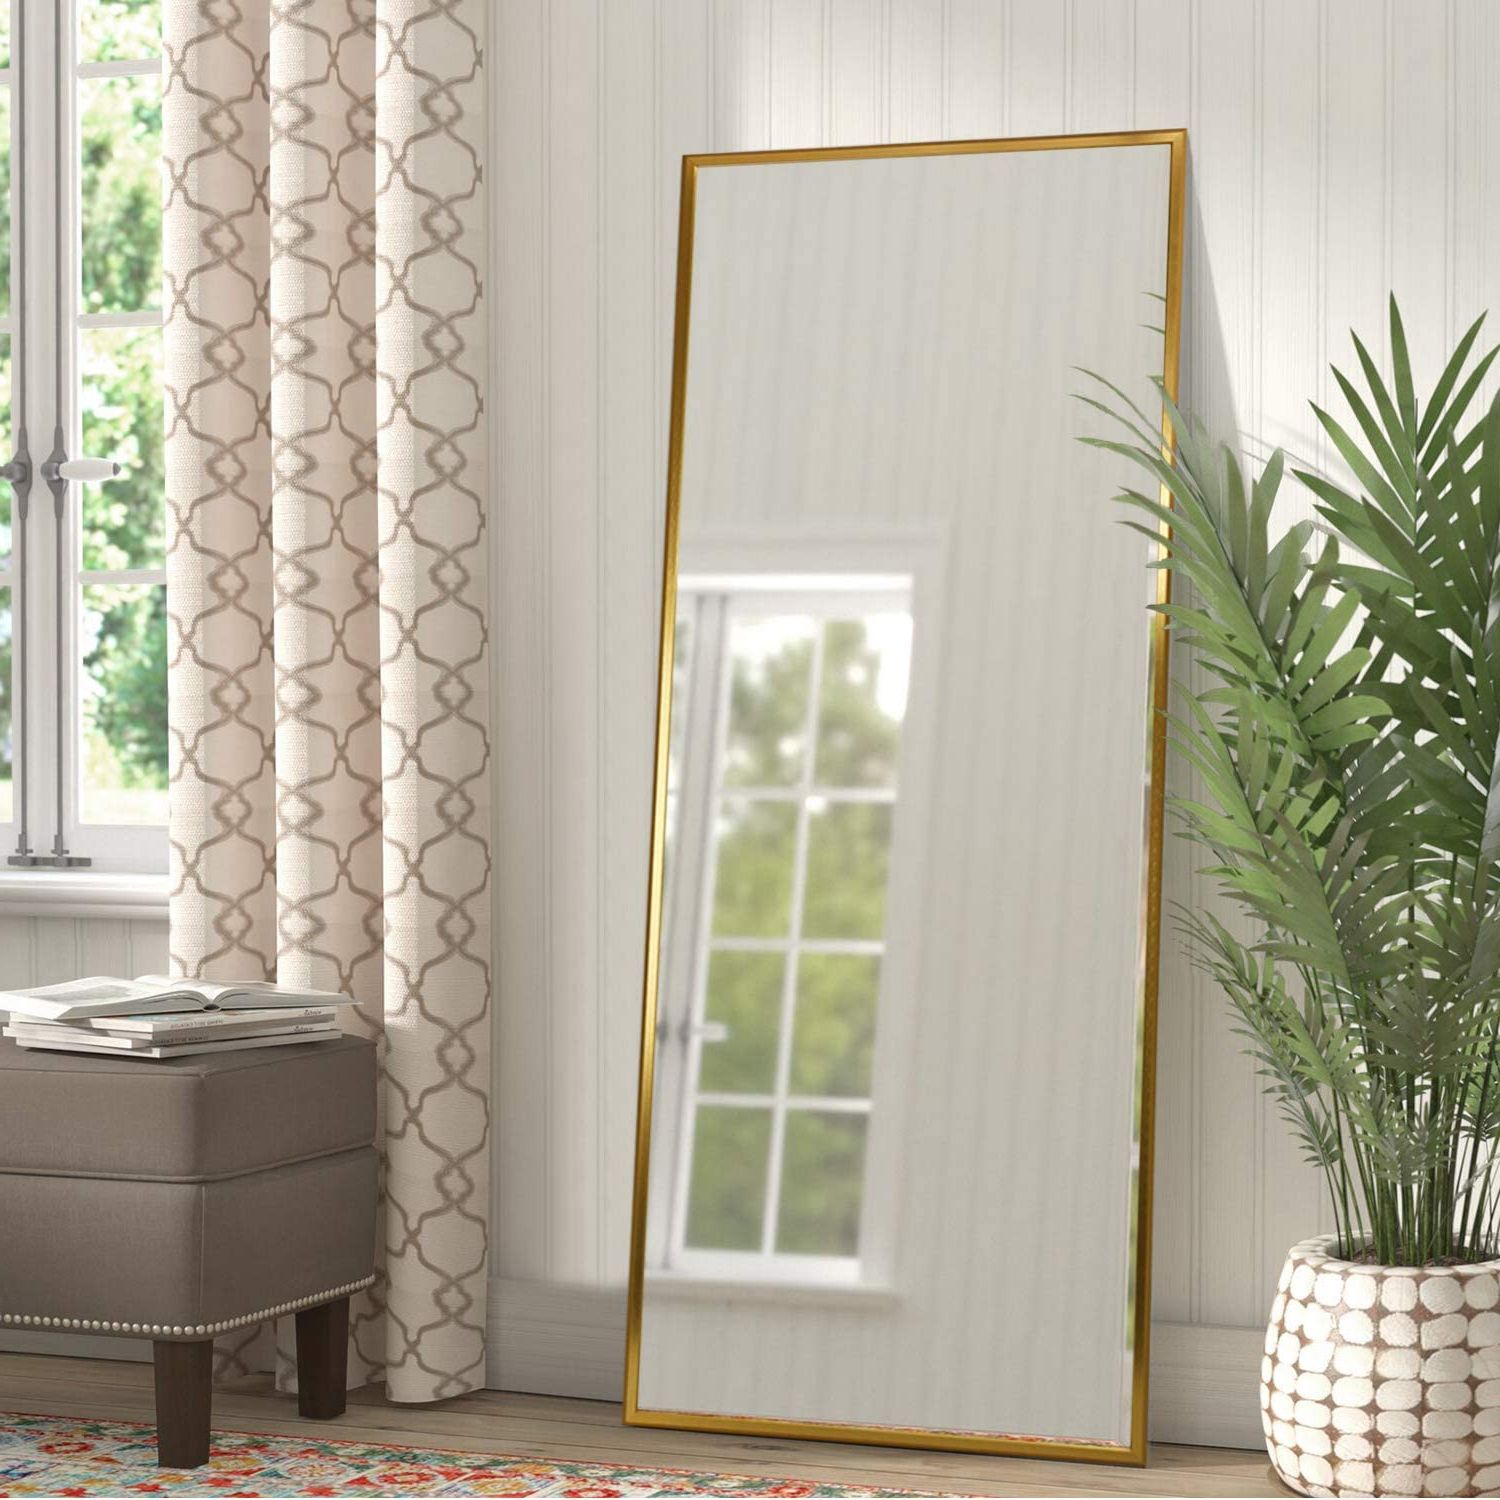 Newest Clear Wall Mirrors Regarding Full Length Mirror Floor Mirror Hanging/leaning Large Wall Mounted (View 4 of 15)